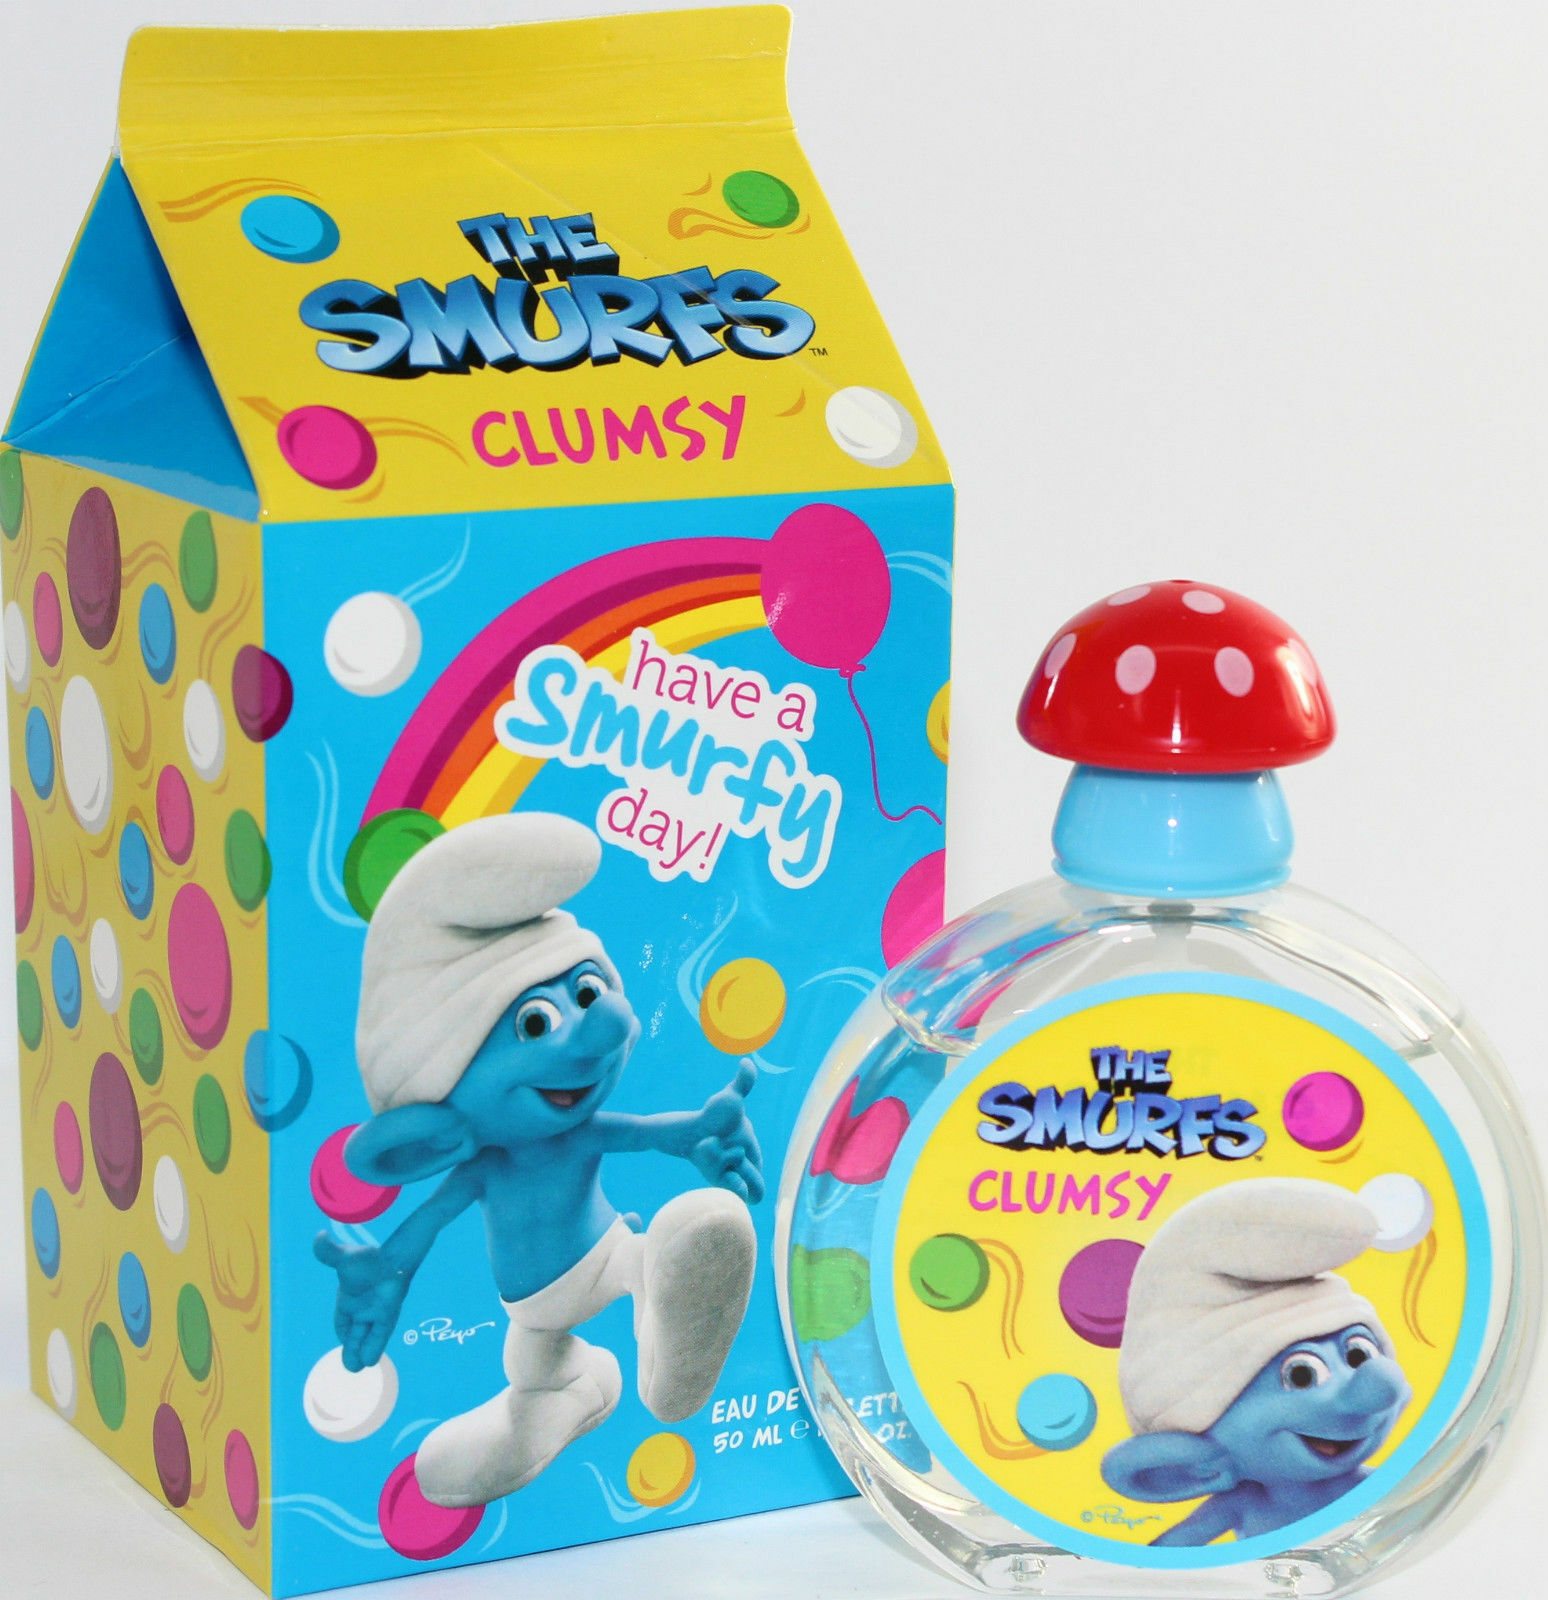 The Smurfs Clumsy 1.7 oz EDT Sprya for Kid'S by Smurfs - New in